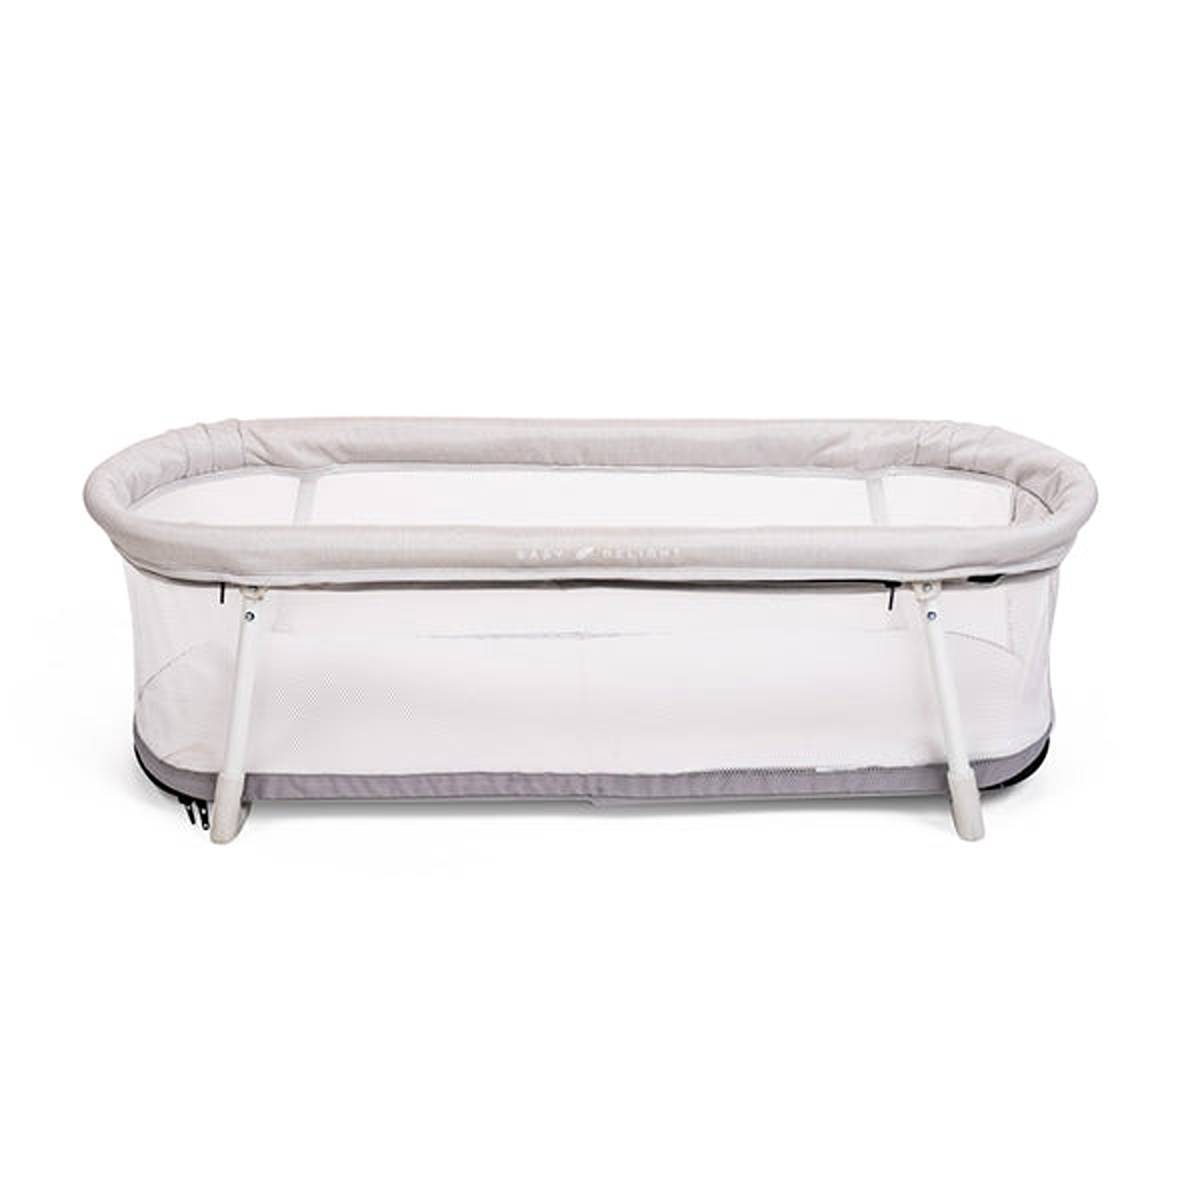 Baby Delight The Snuggle Nest Portable Bassinet, 819956001500 - ANB Baby